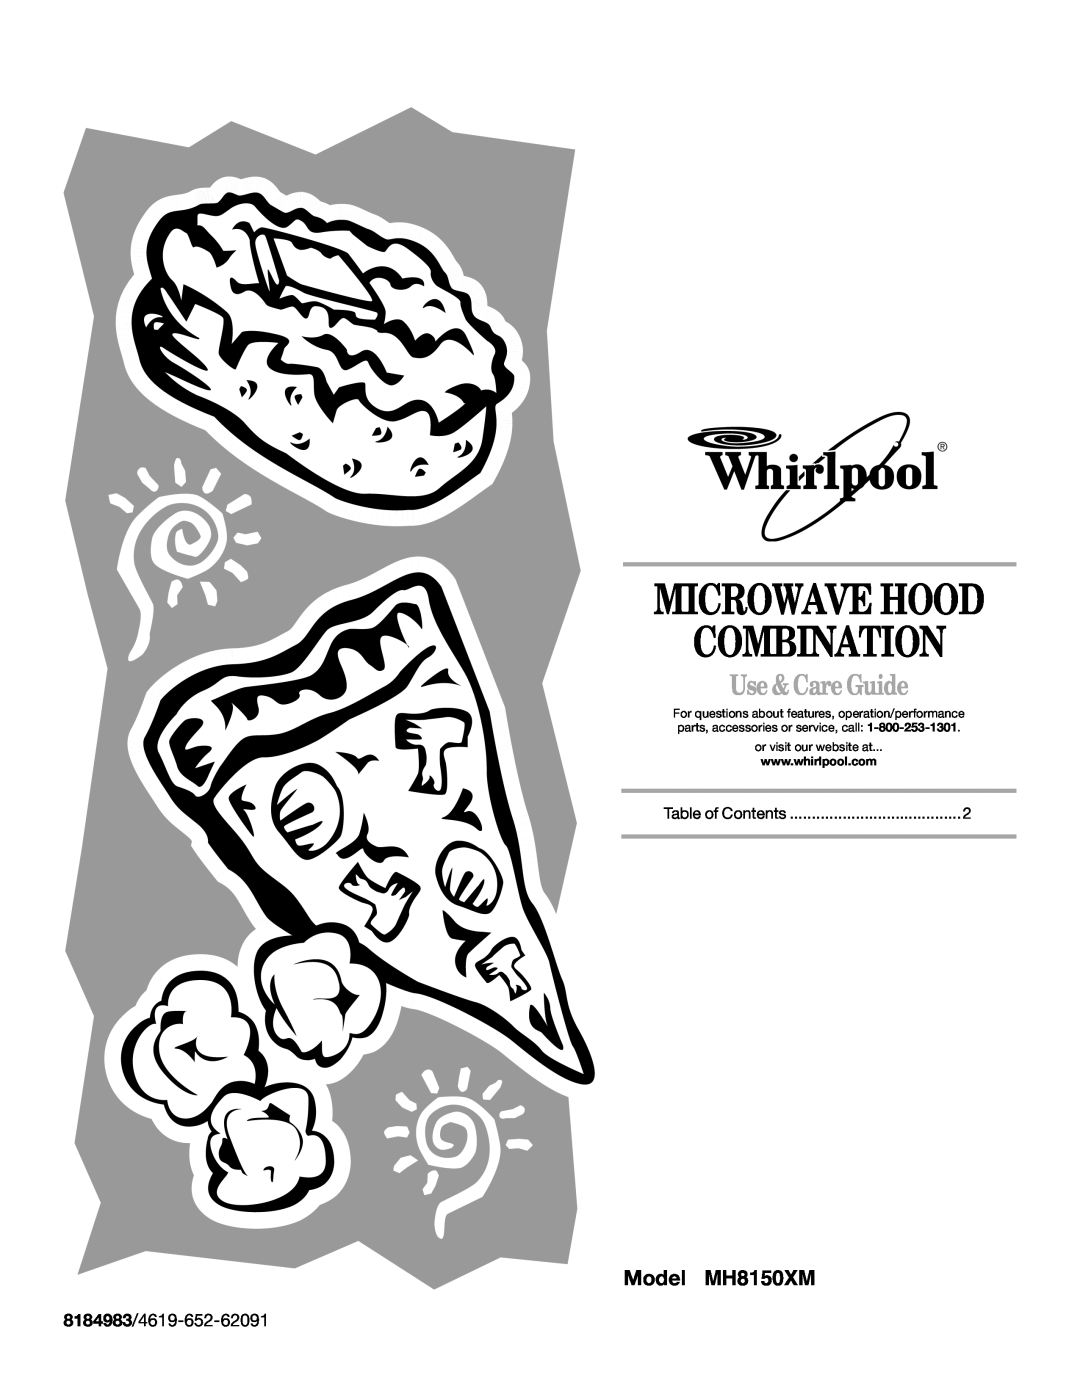 Whirlpool manual Microwave Hood Combination, Use & Care Guide, Model MH8150XM, or visit our website at 